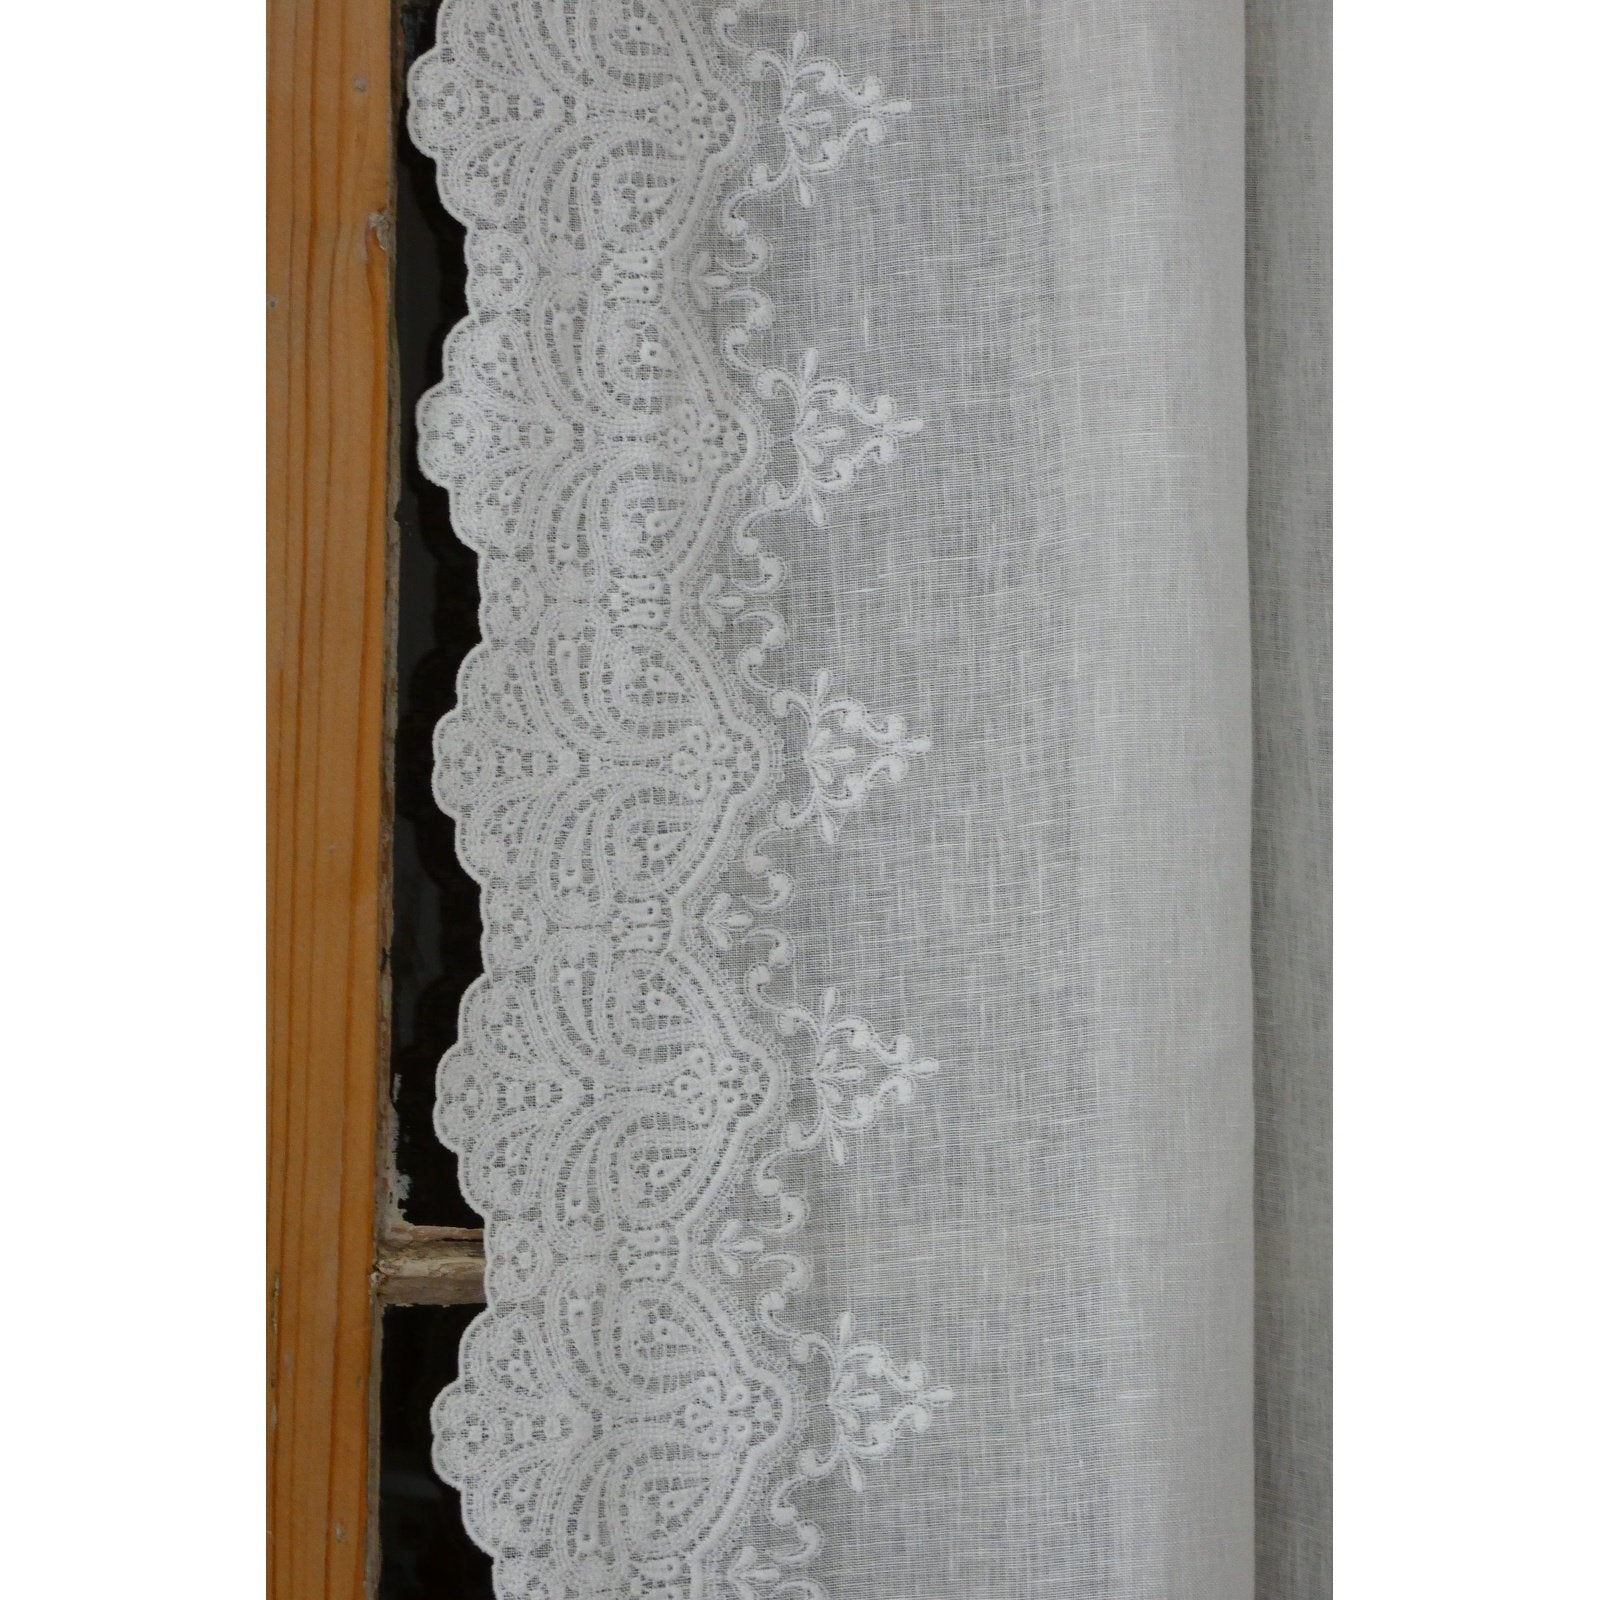 Off-white linen panel with intricate embroidered scallops along both sides.